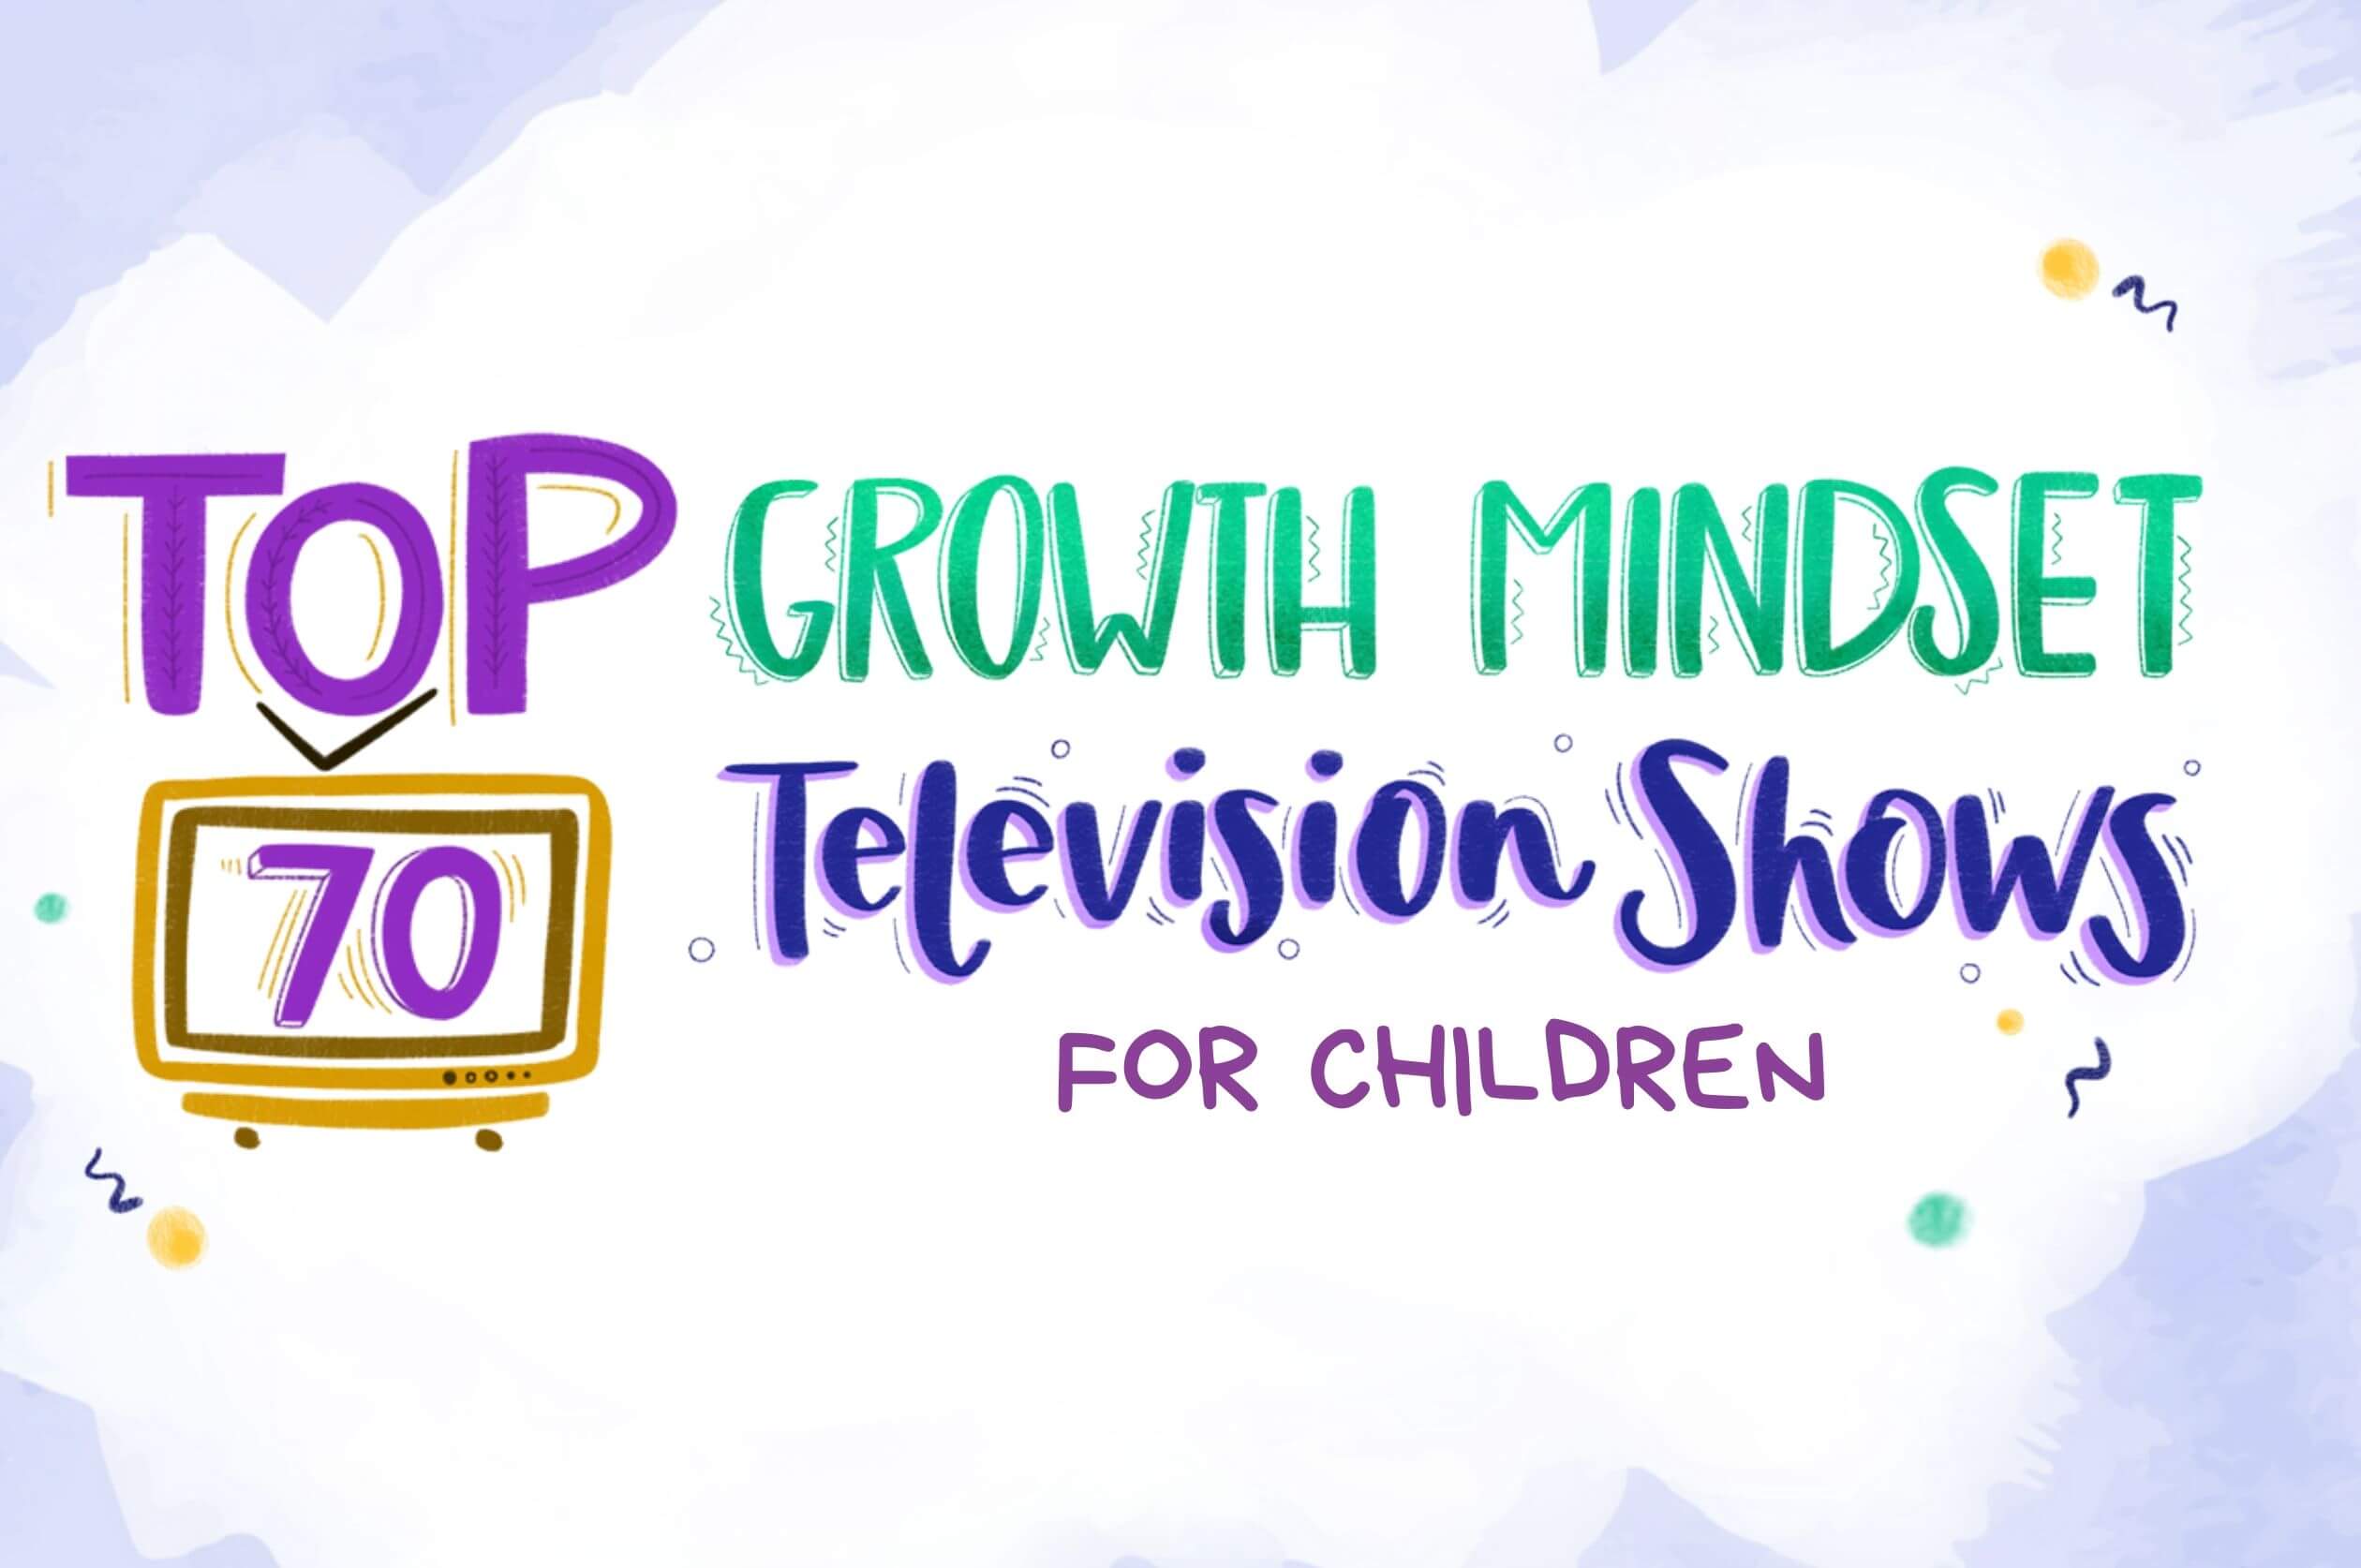 Top 70 Growth Mindset Television Shows